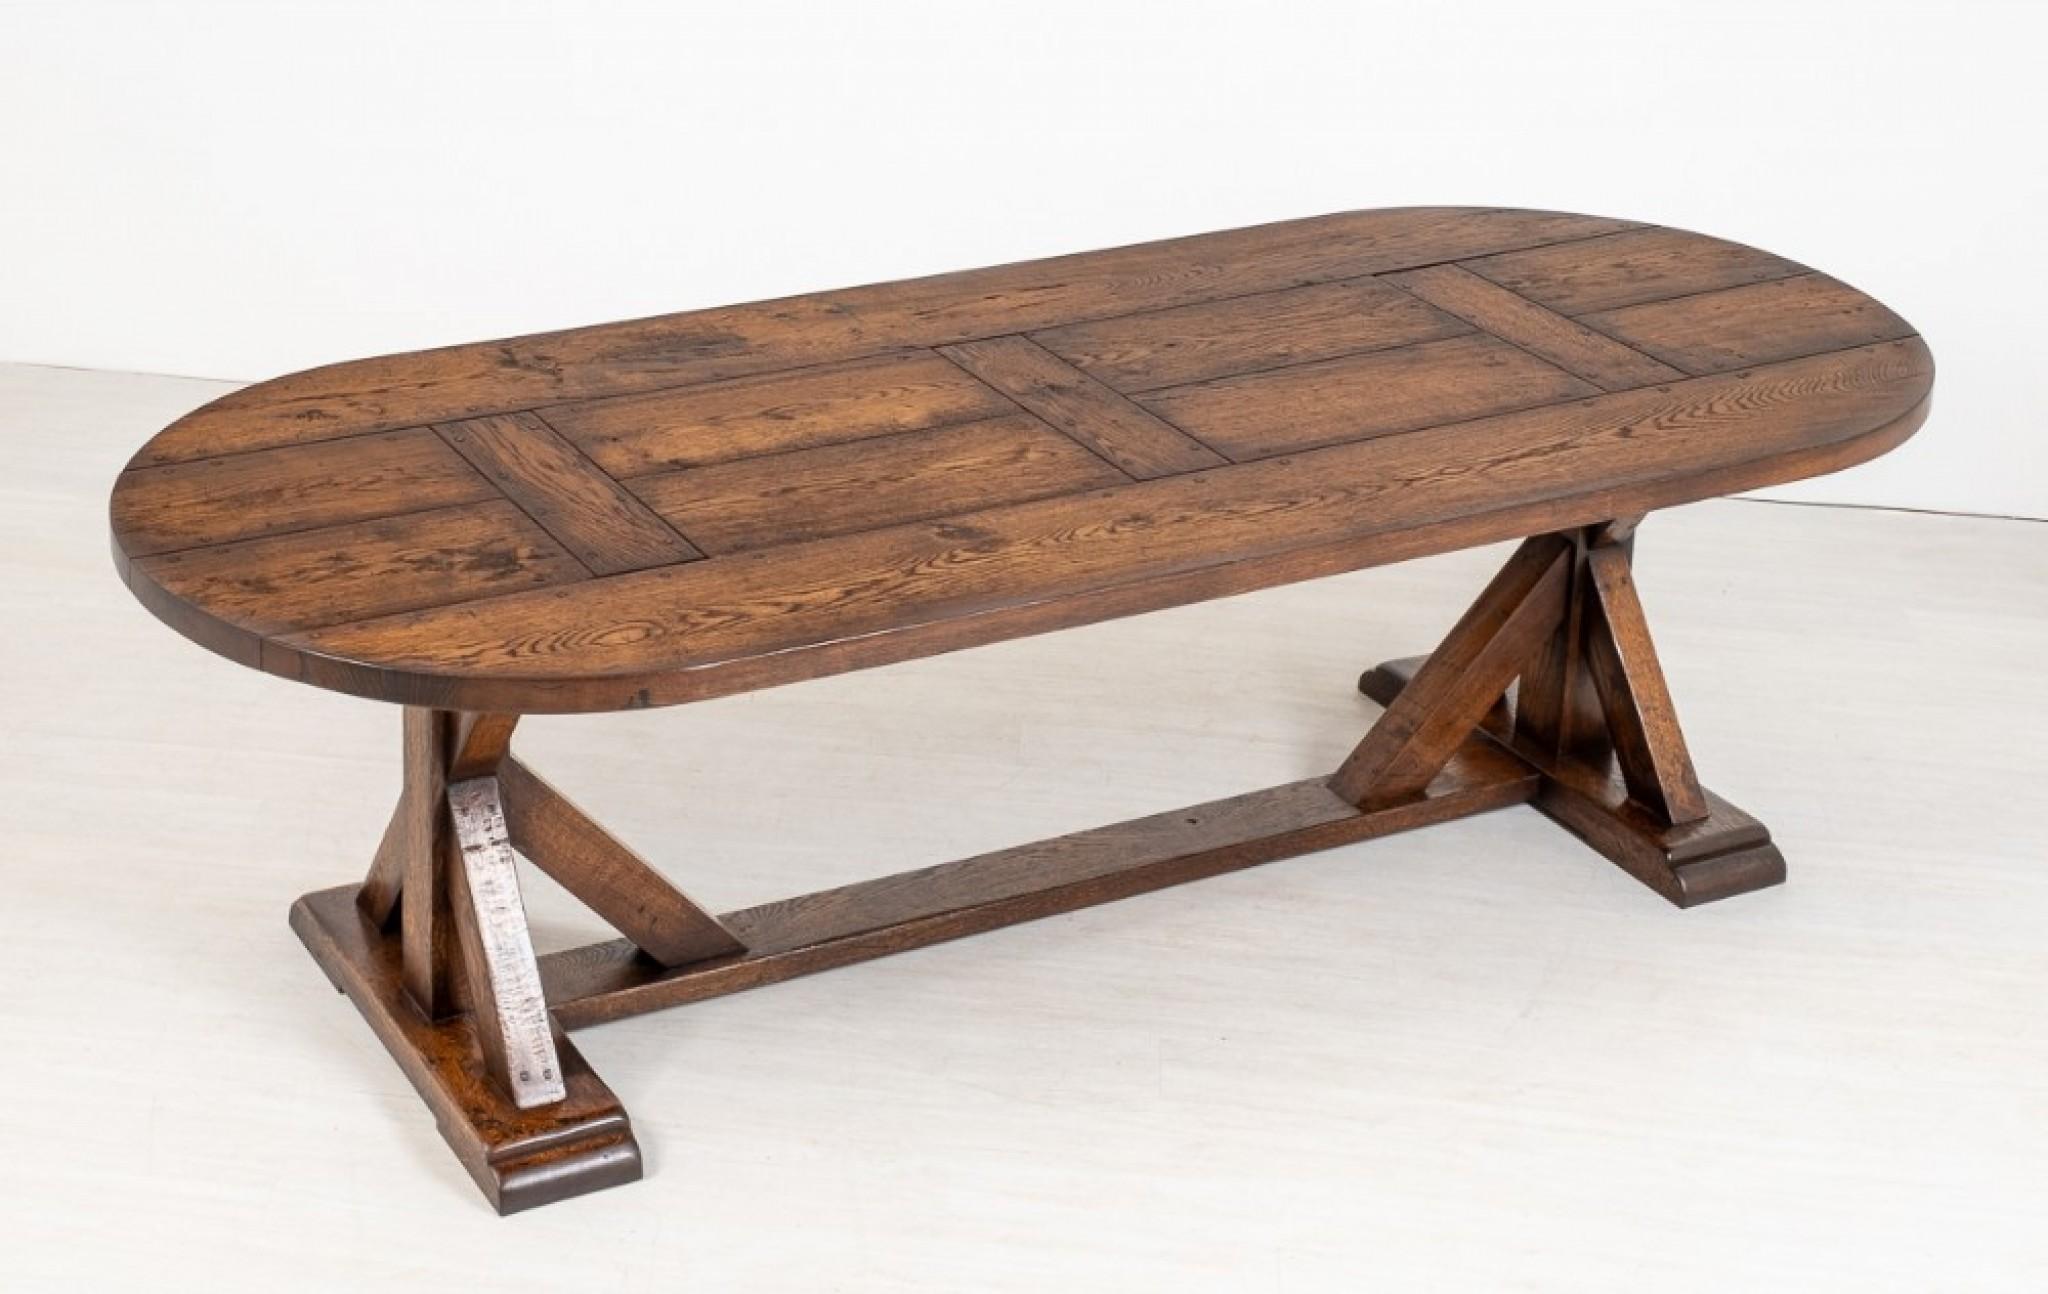 Solid oak refectory table of the medieval style.
The top of the table is made up of 4 planks with cross members and is of a bow ended form.
circa 1920
The base of the table featuring sleigh feet and crisscross uprights.
Held together with wooden